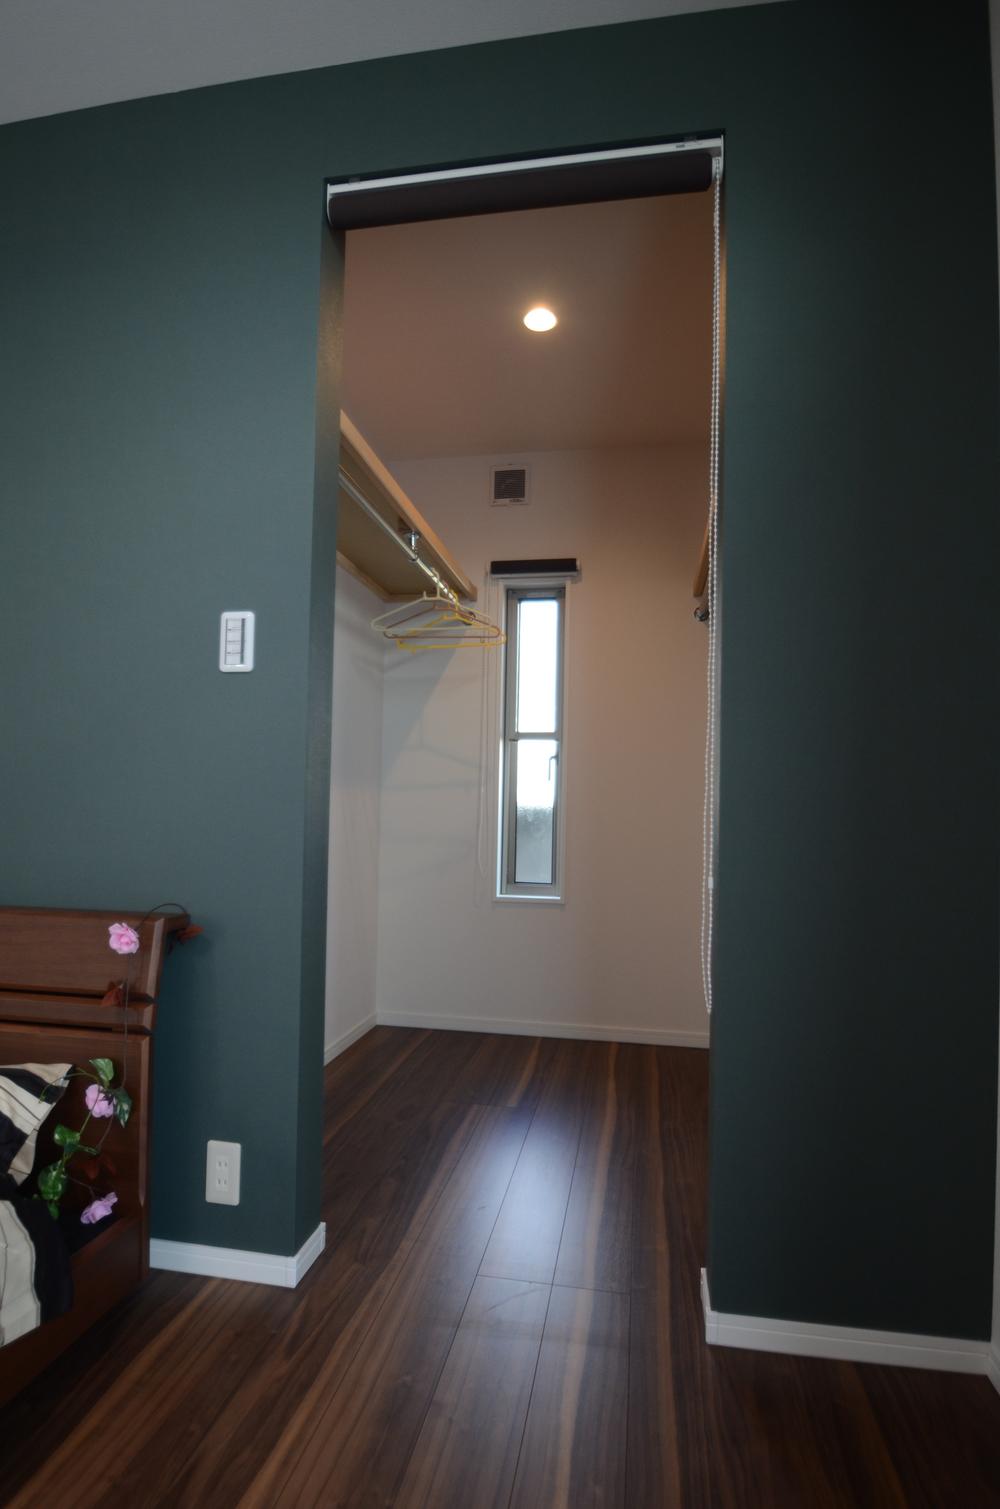 Receipt. Accent of Moss Green is a stylish master bedroom walk-in closet! Luggage of 2 Pledge worth enters refreshing!